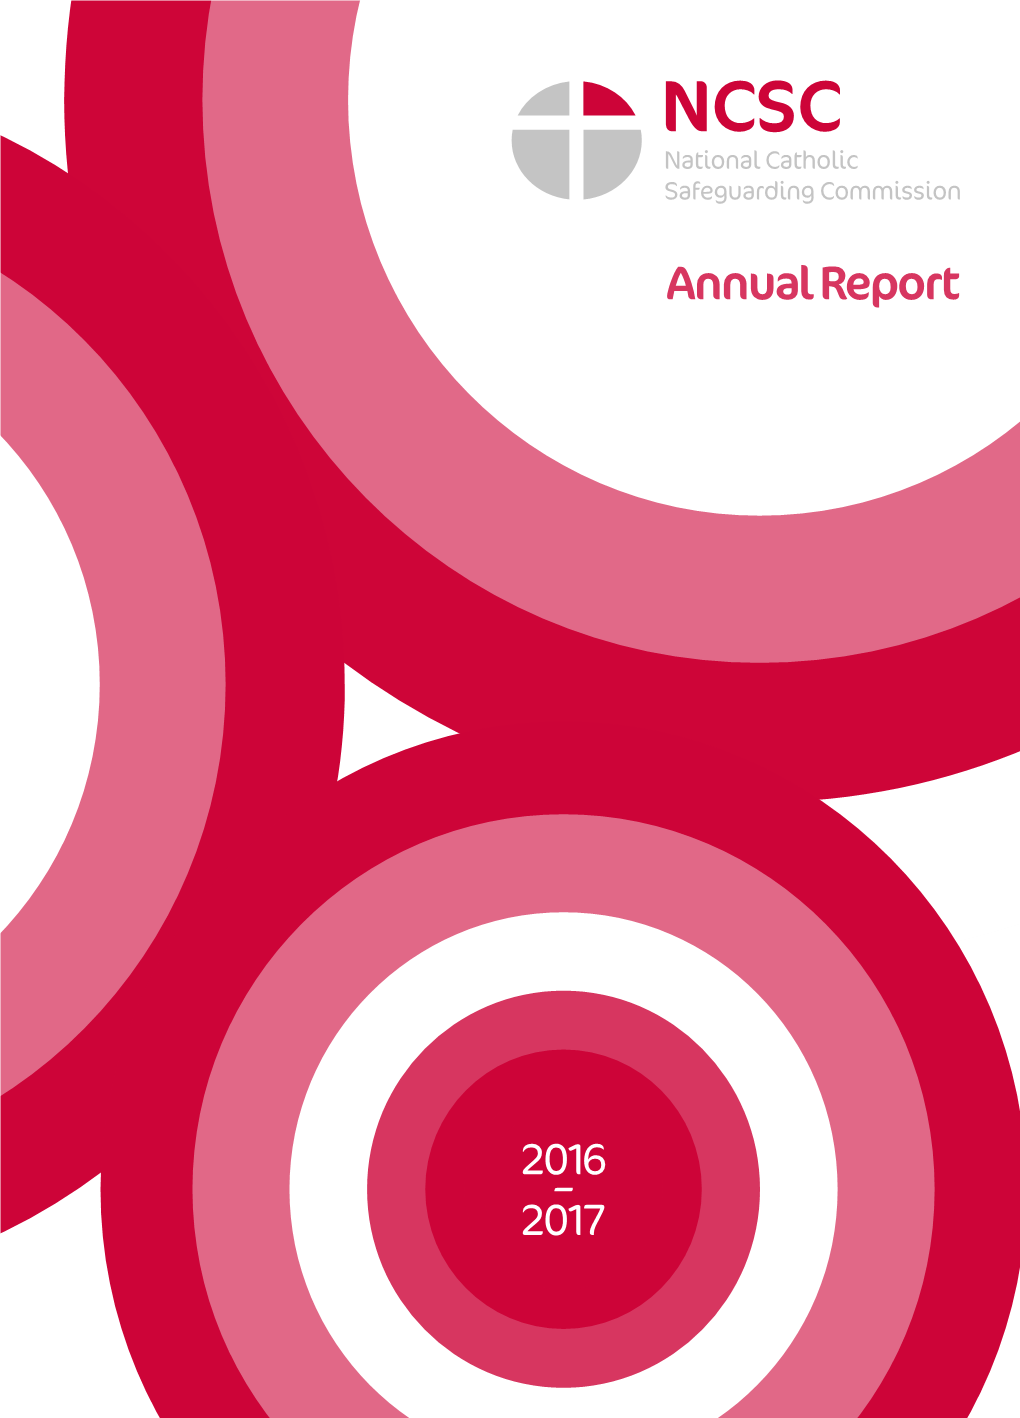 NCSC Annual Report 2016-17